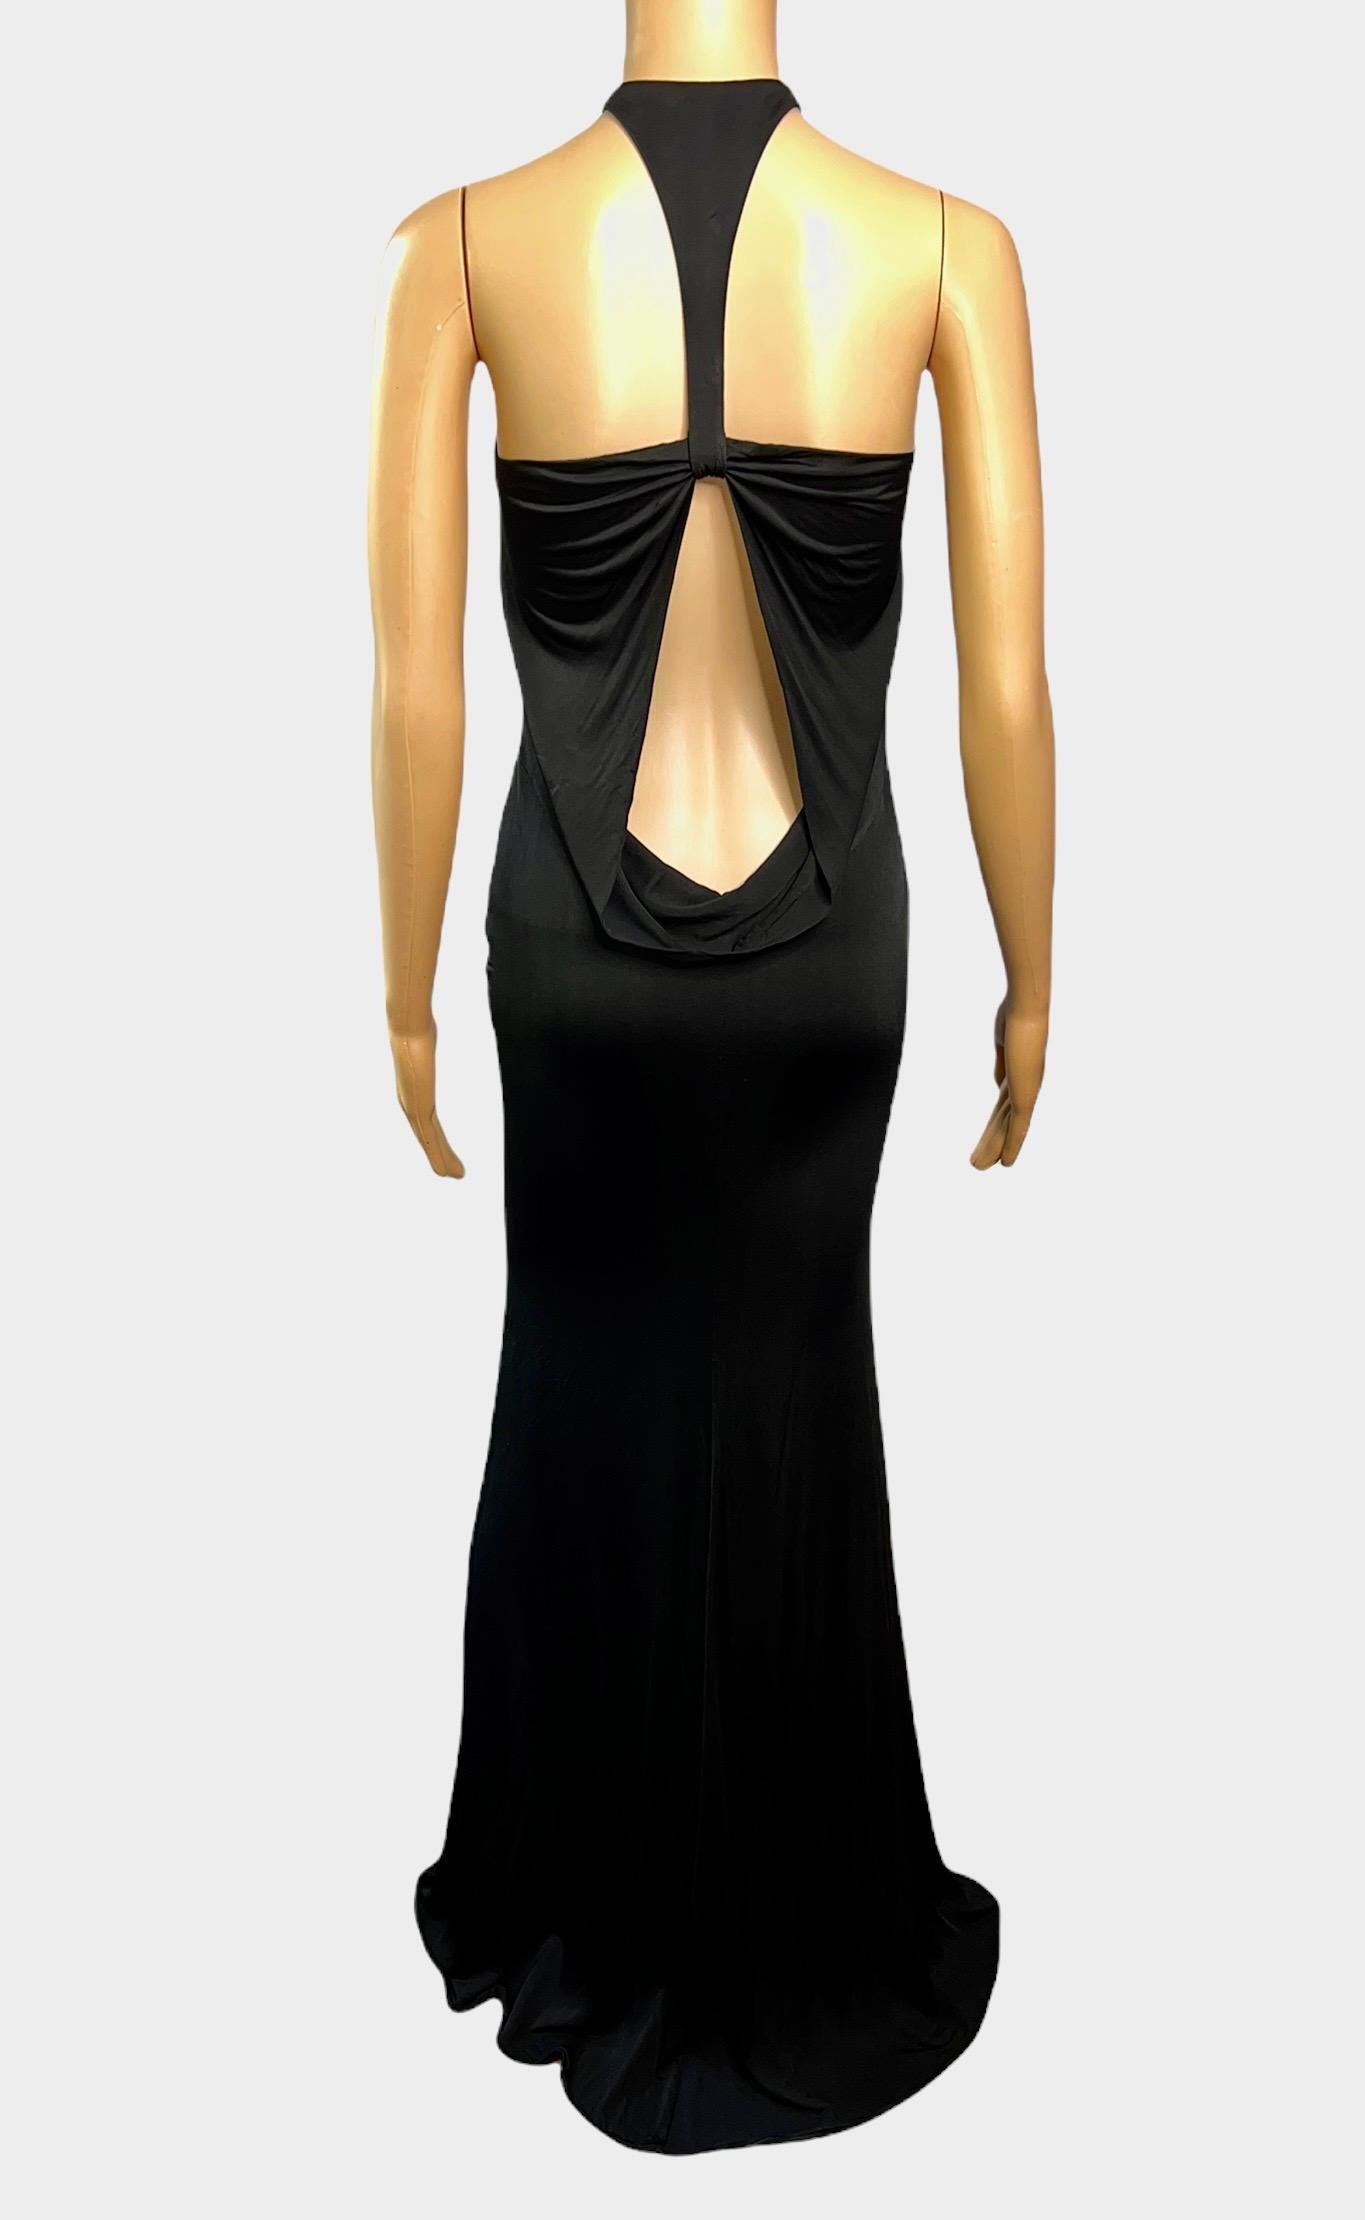 Tom Ford for Gucci F/W 2004 Plunging Cutout Black Evening Dress Gown For Sale 1